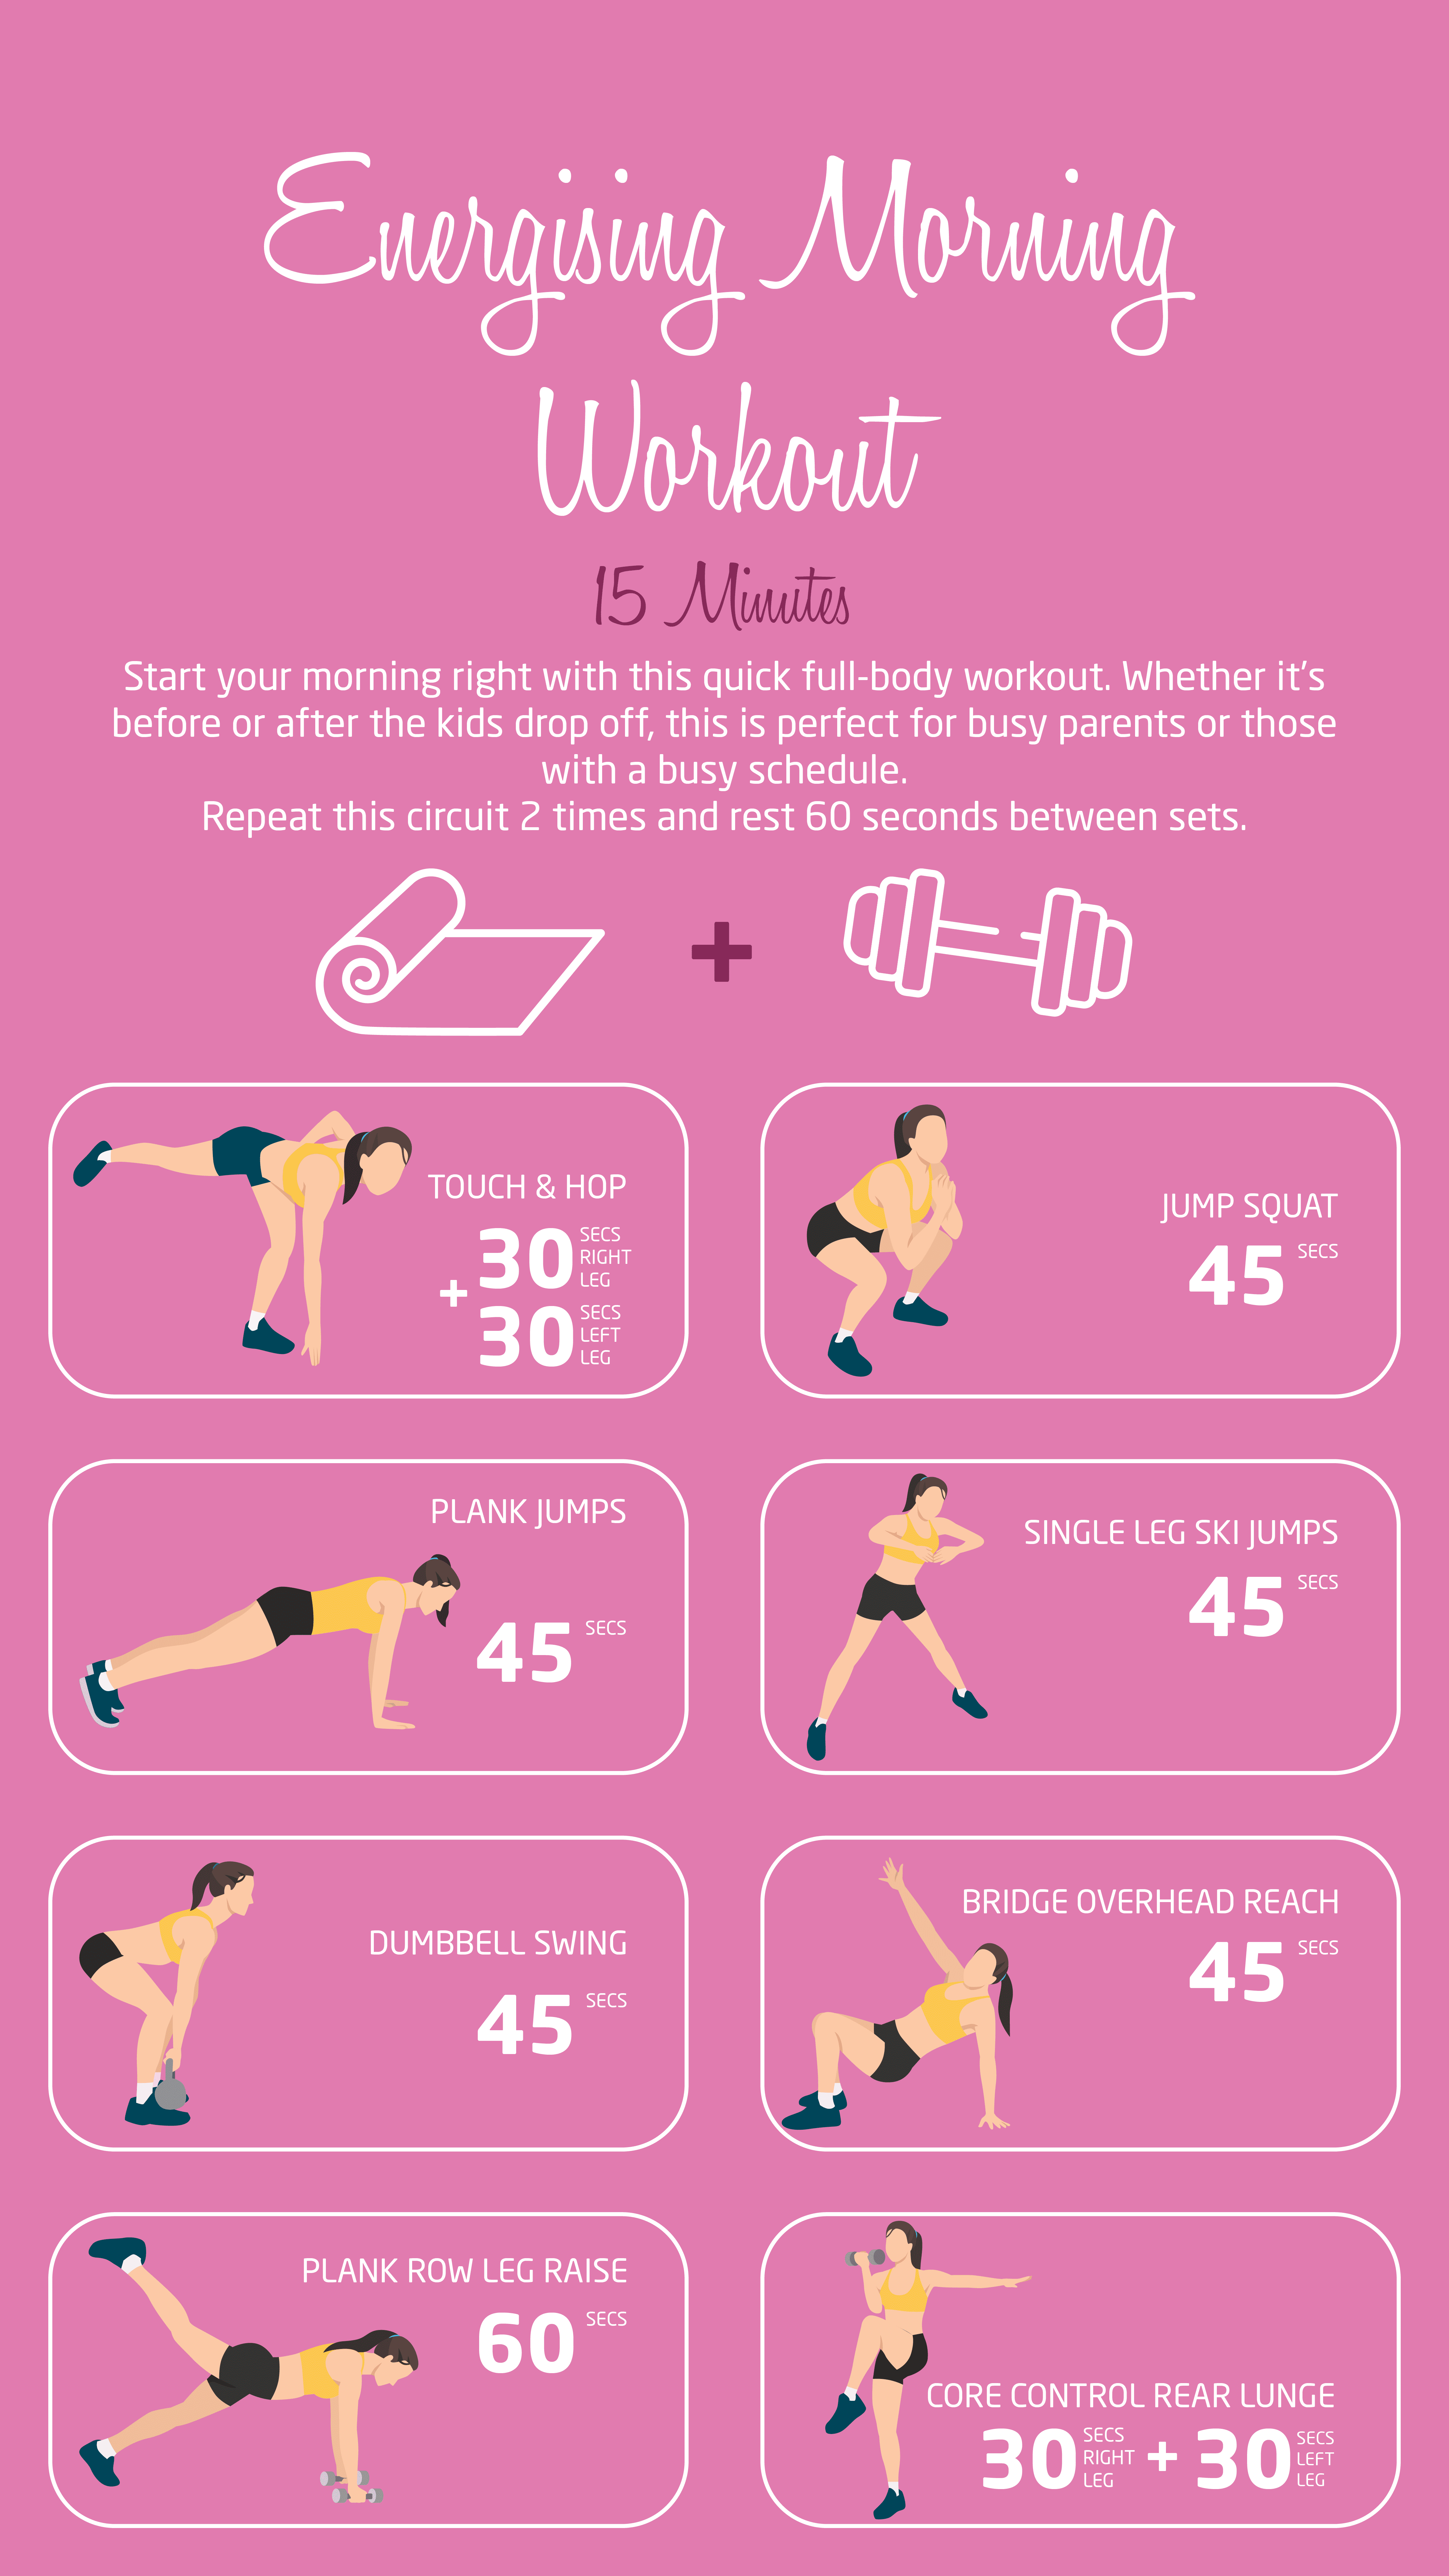 Here Are Some Quick Exercises You Can Do in the Morning